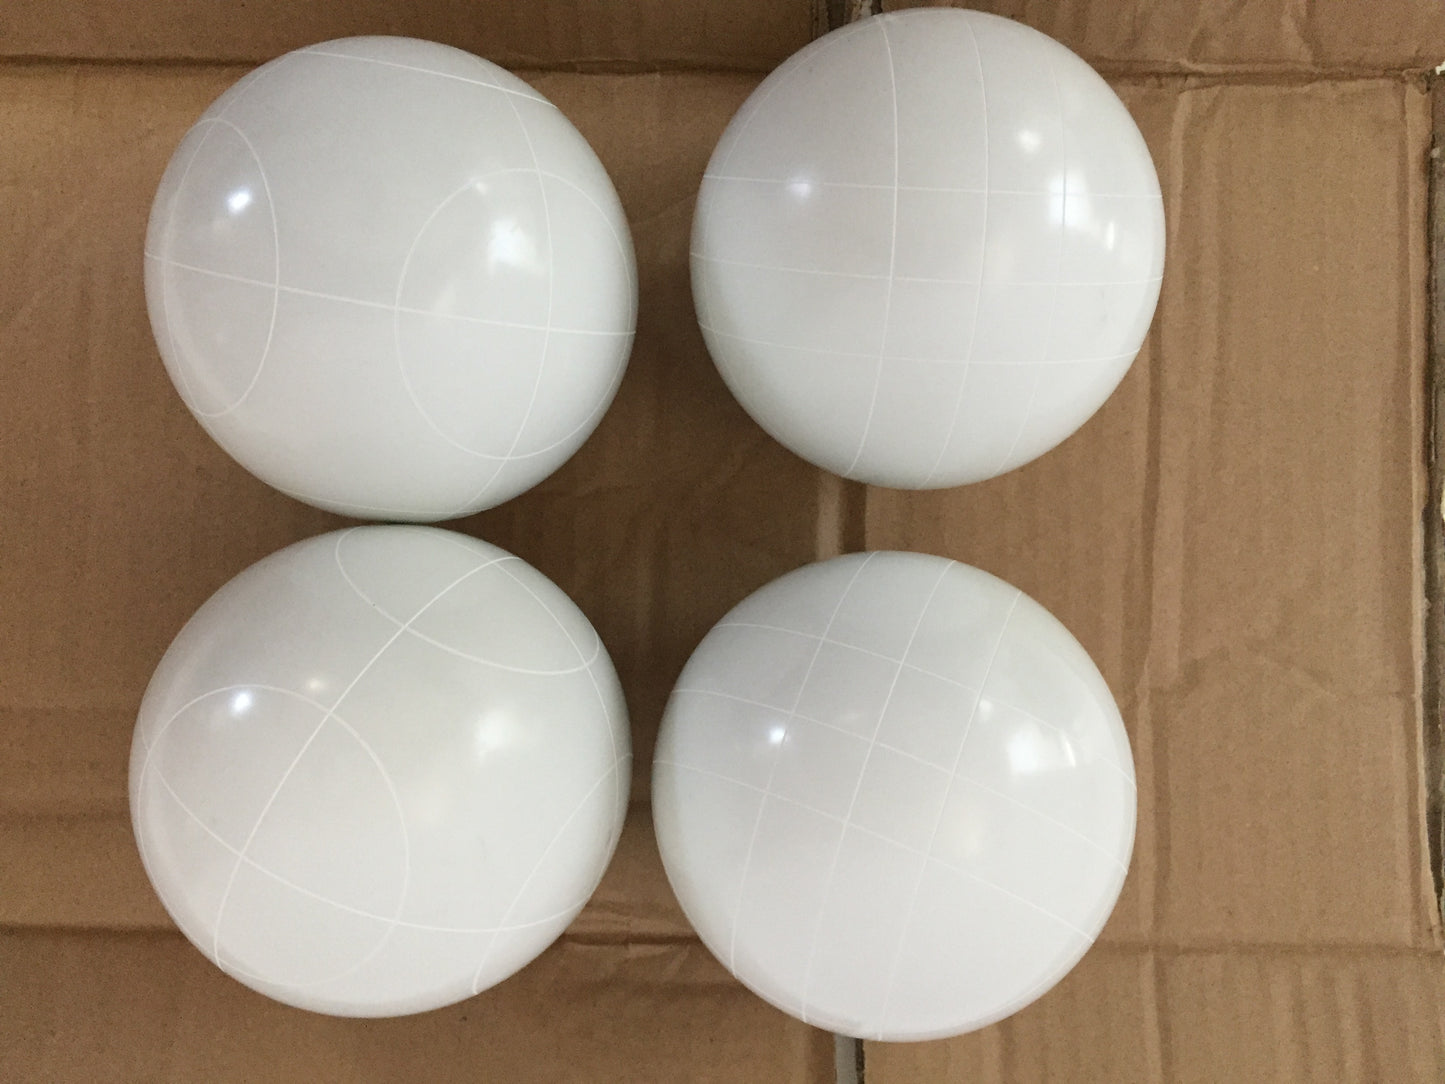 107mm 4 pack Bocce Balls  - White with 2 different scoring patterns